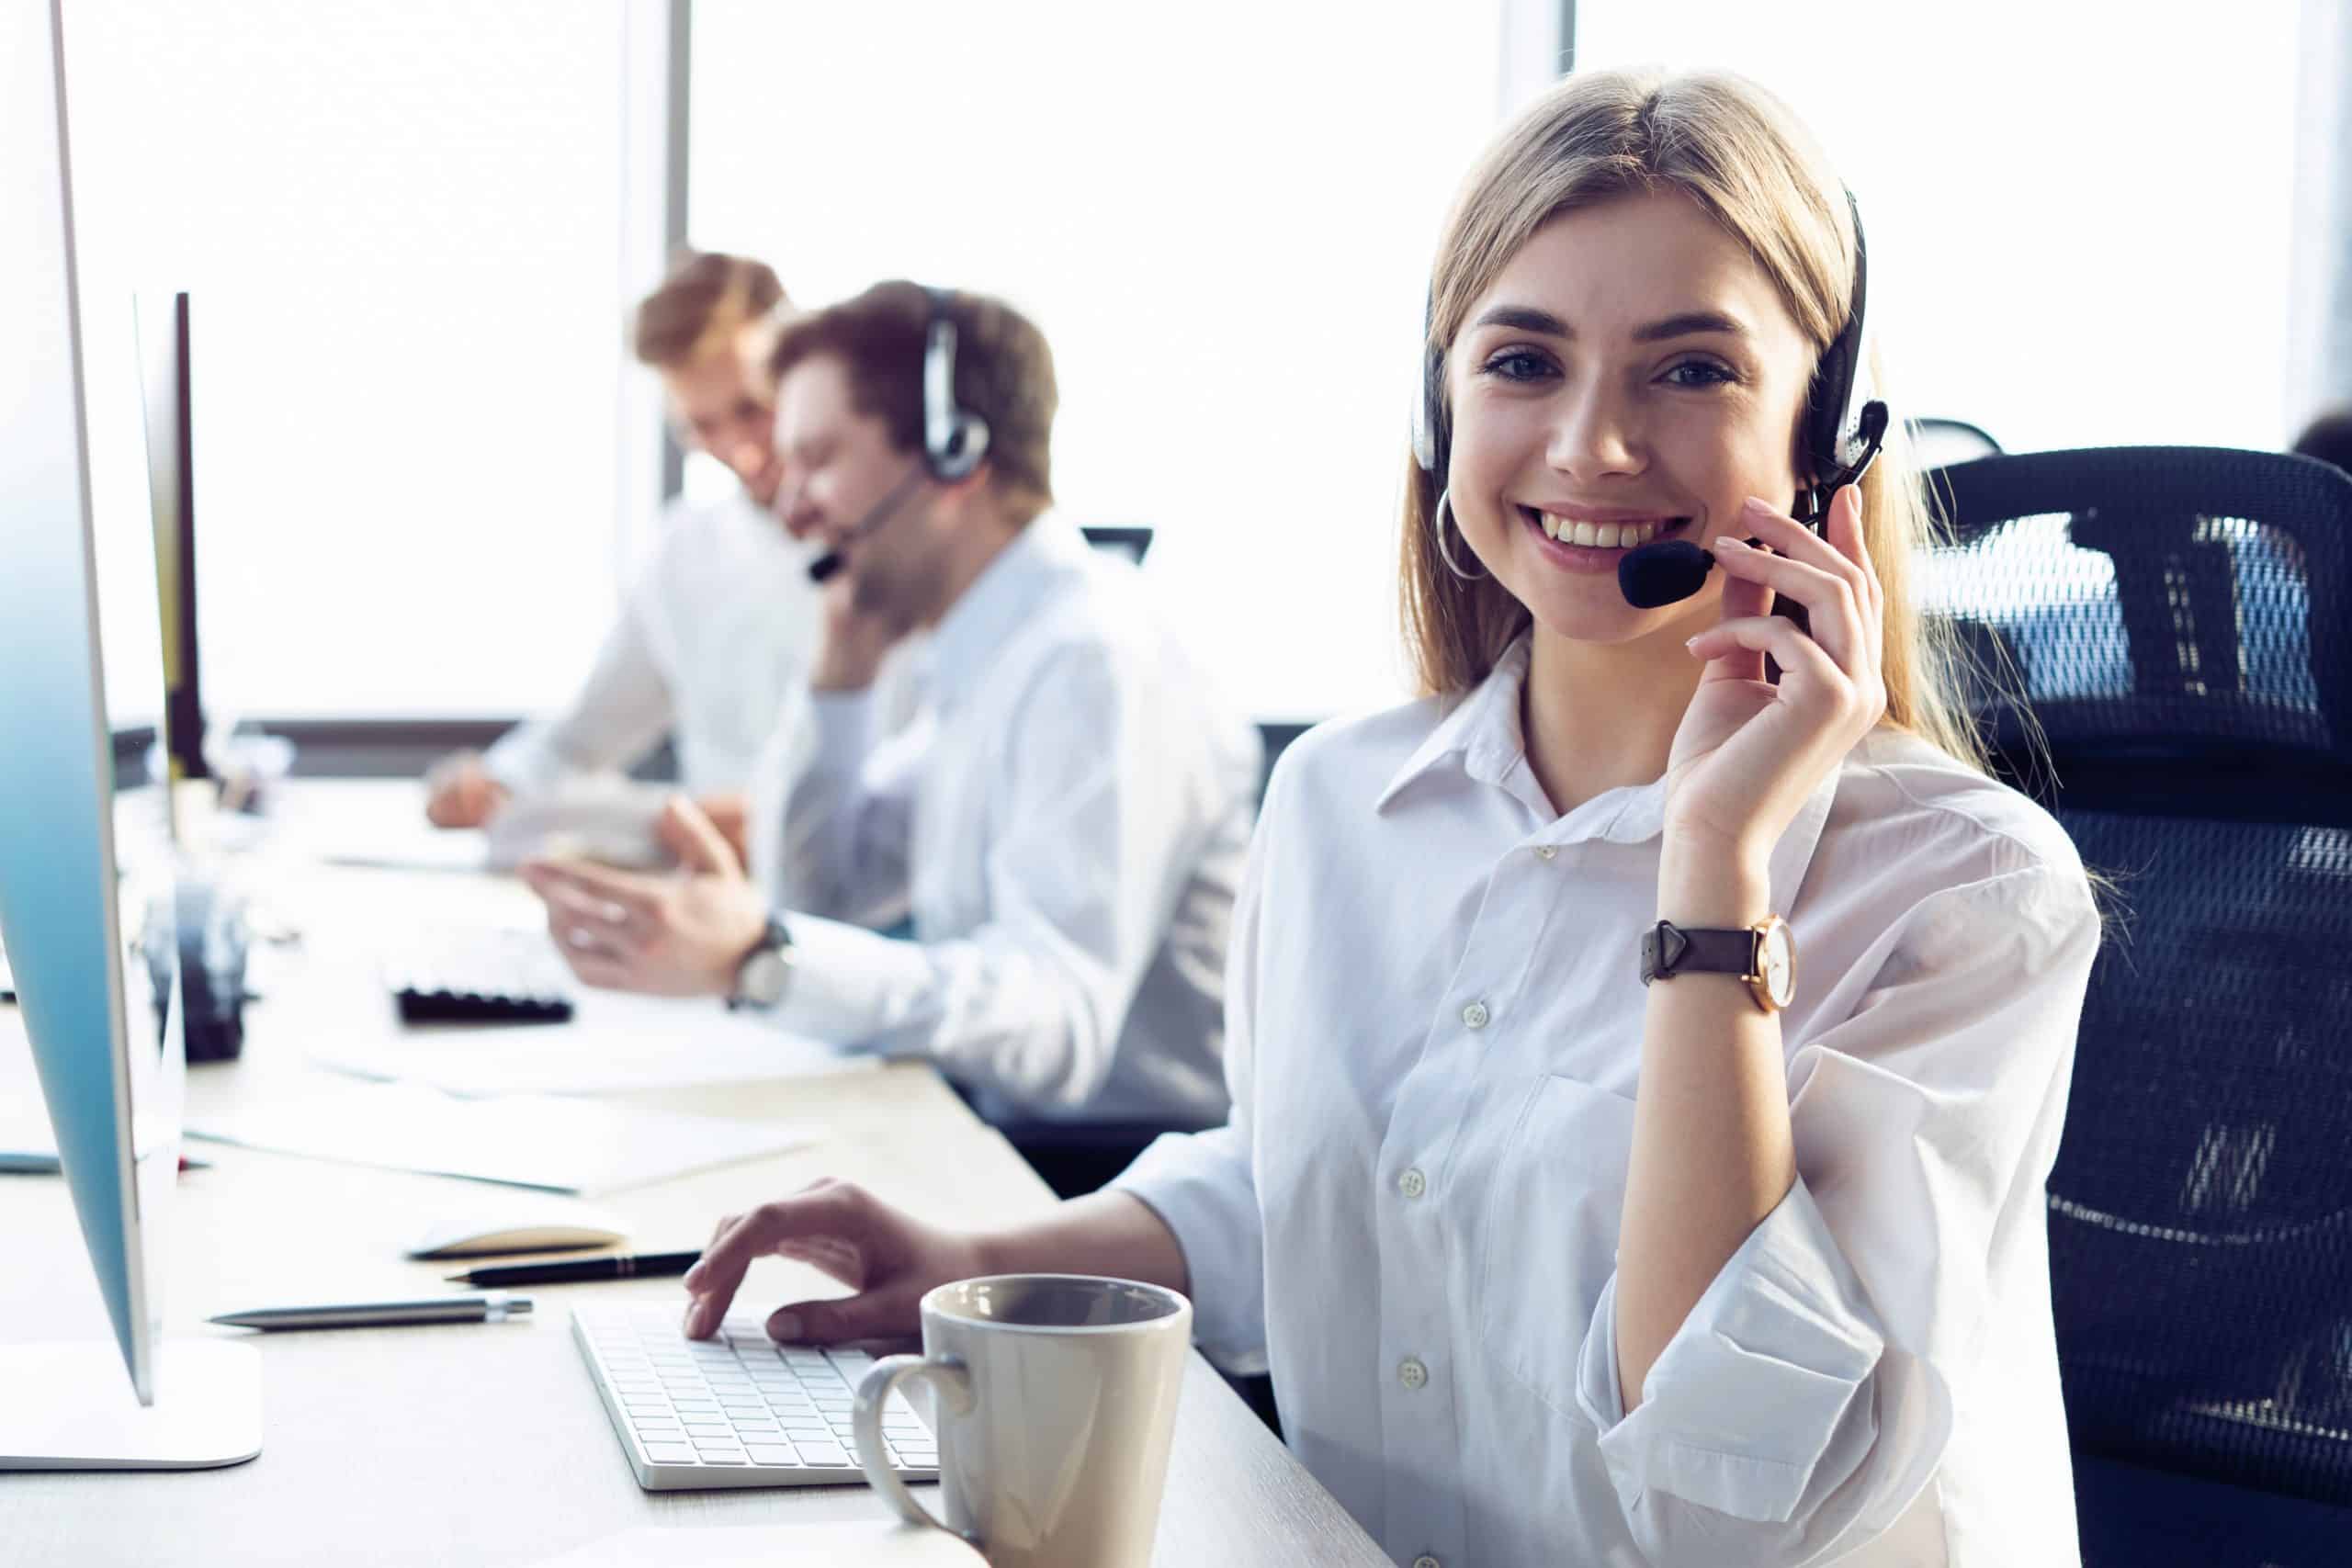 Build a Call Overflow System to Manage Overloaded Phone Lines